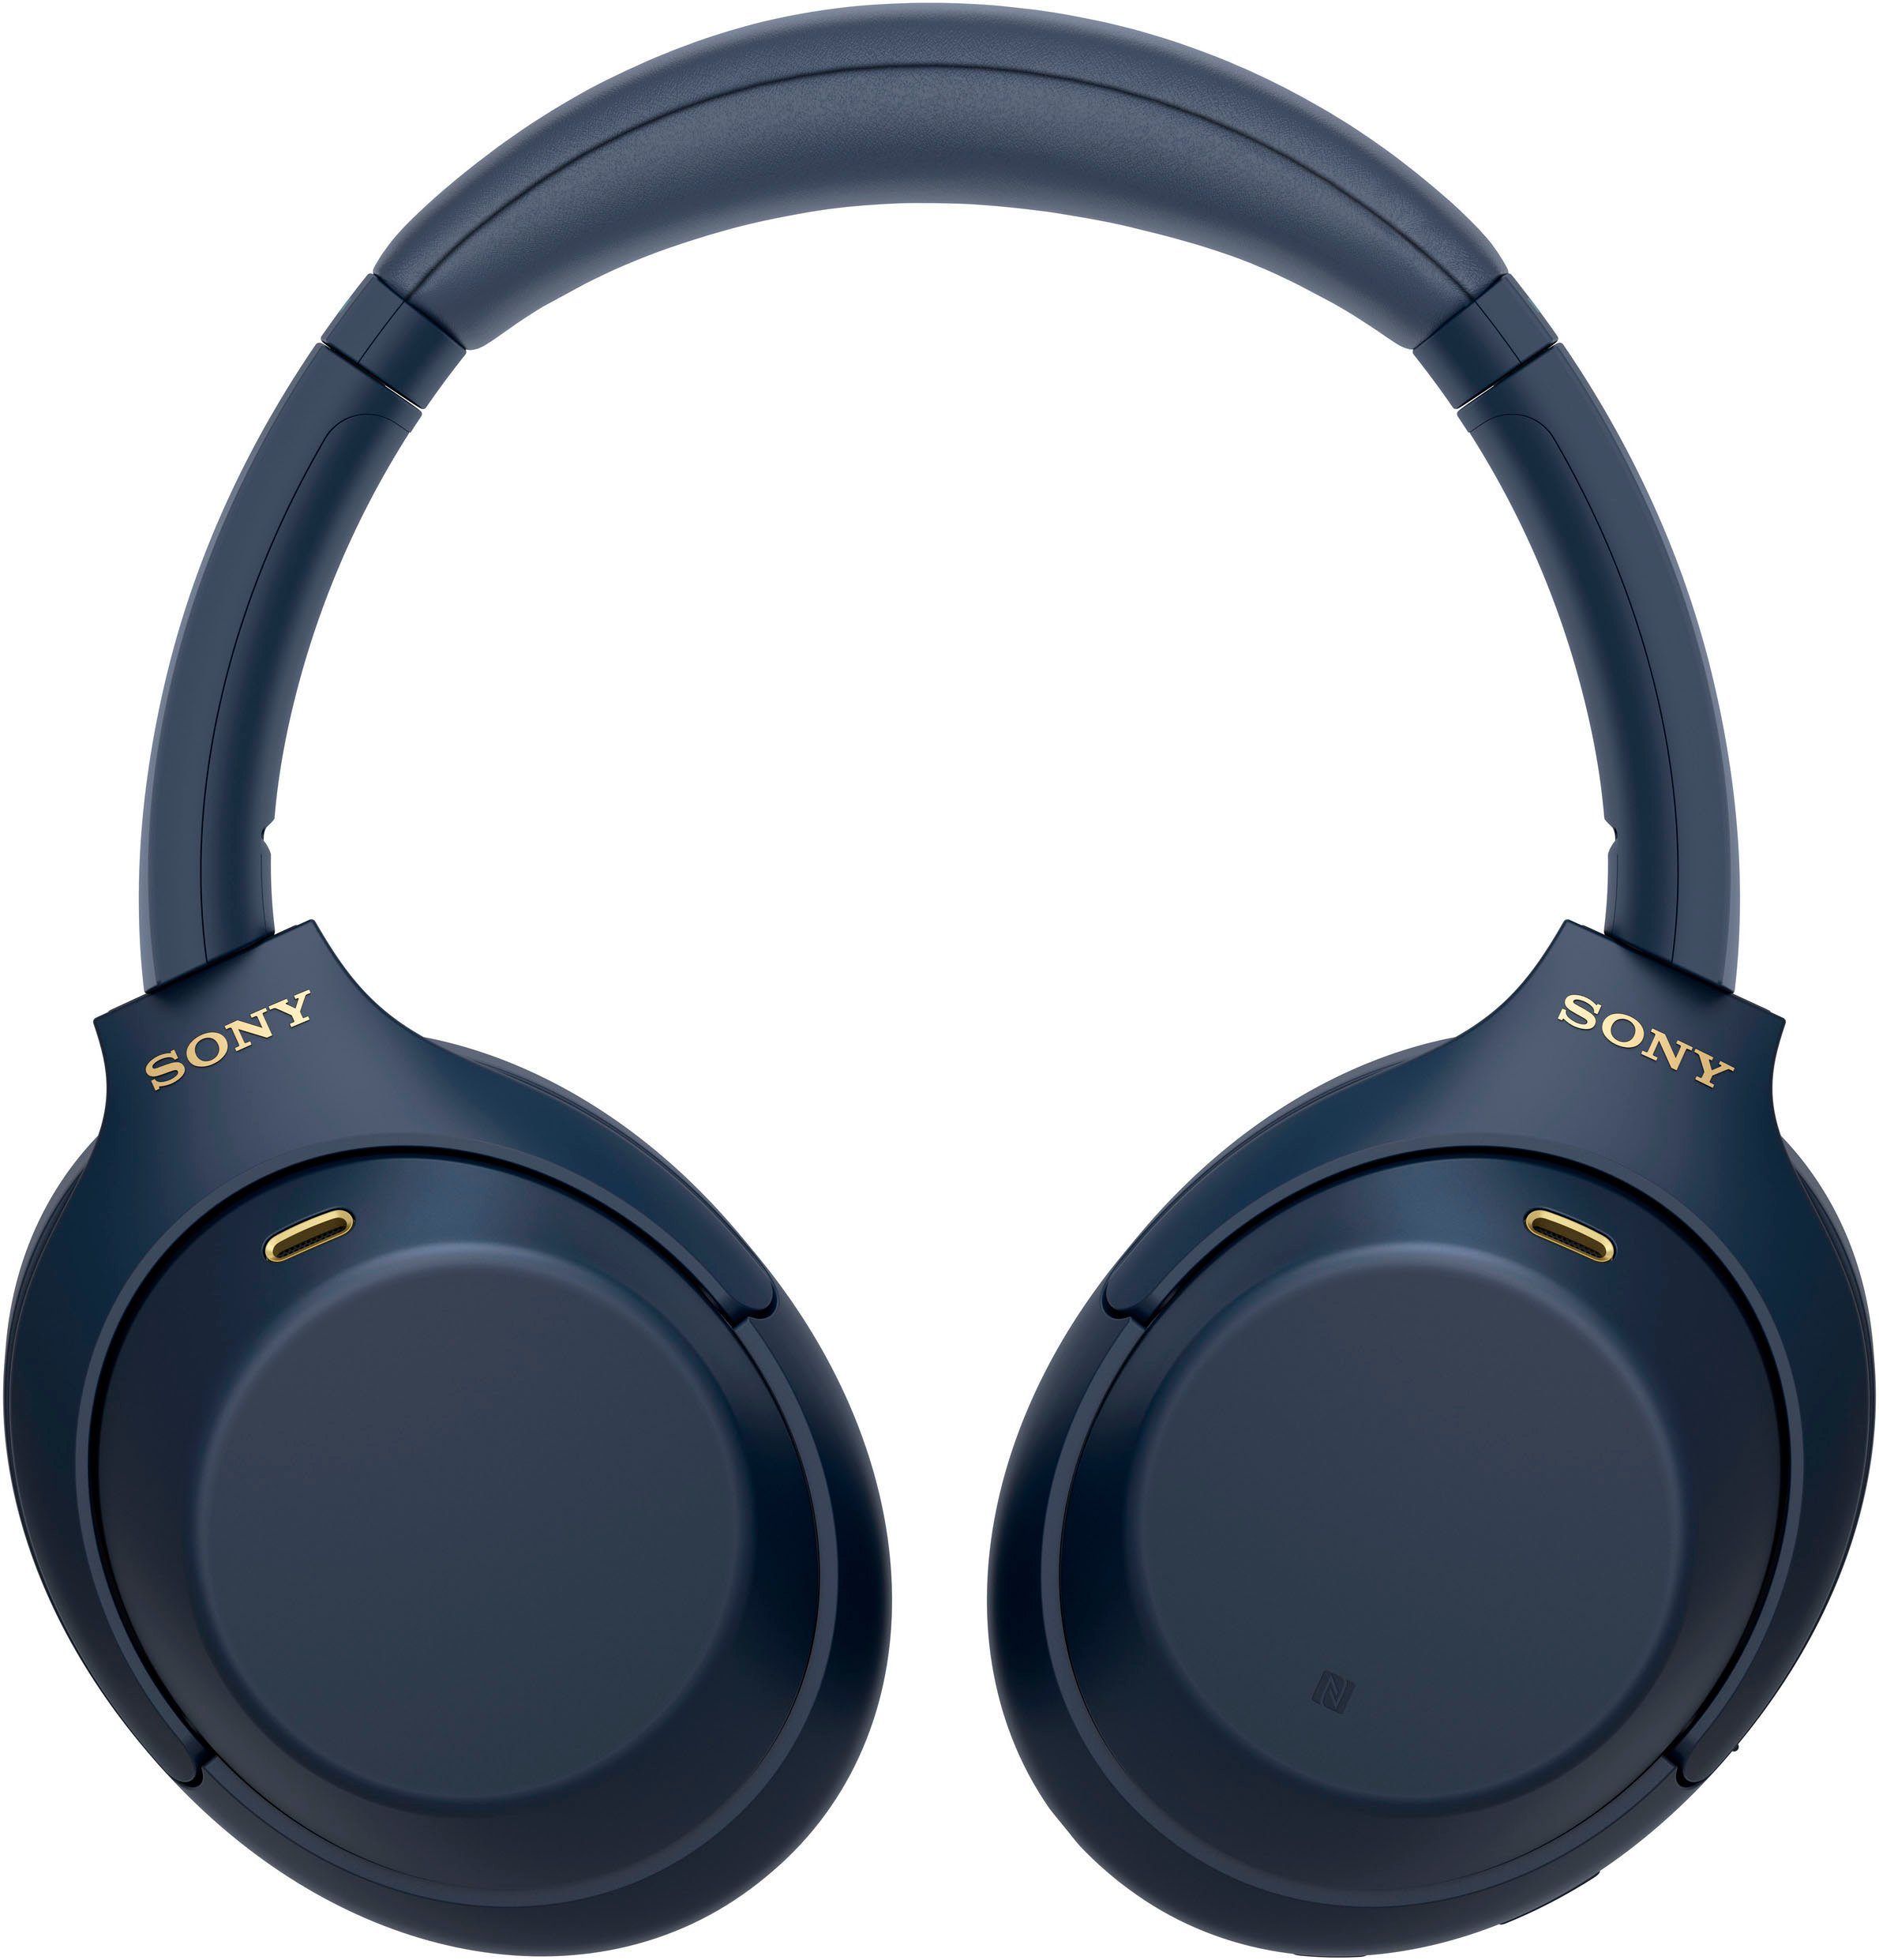 NFC, Sony via Verbindung Touch Bluetooth, kabelloser NFC, blau WH-1000XM4 One-Touch Sensor, Over-Ear-Kopfhörer (Noise-Cancelling, Schnellladefunktion)